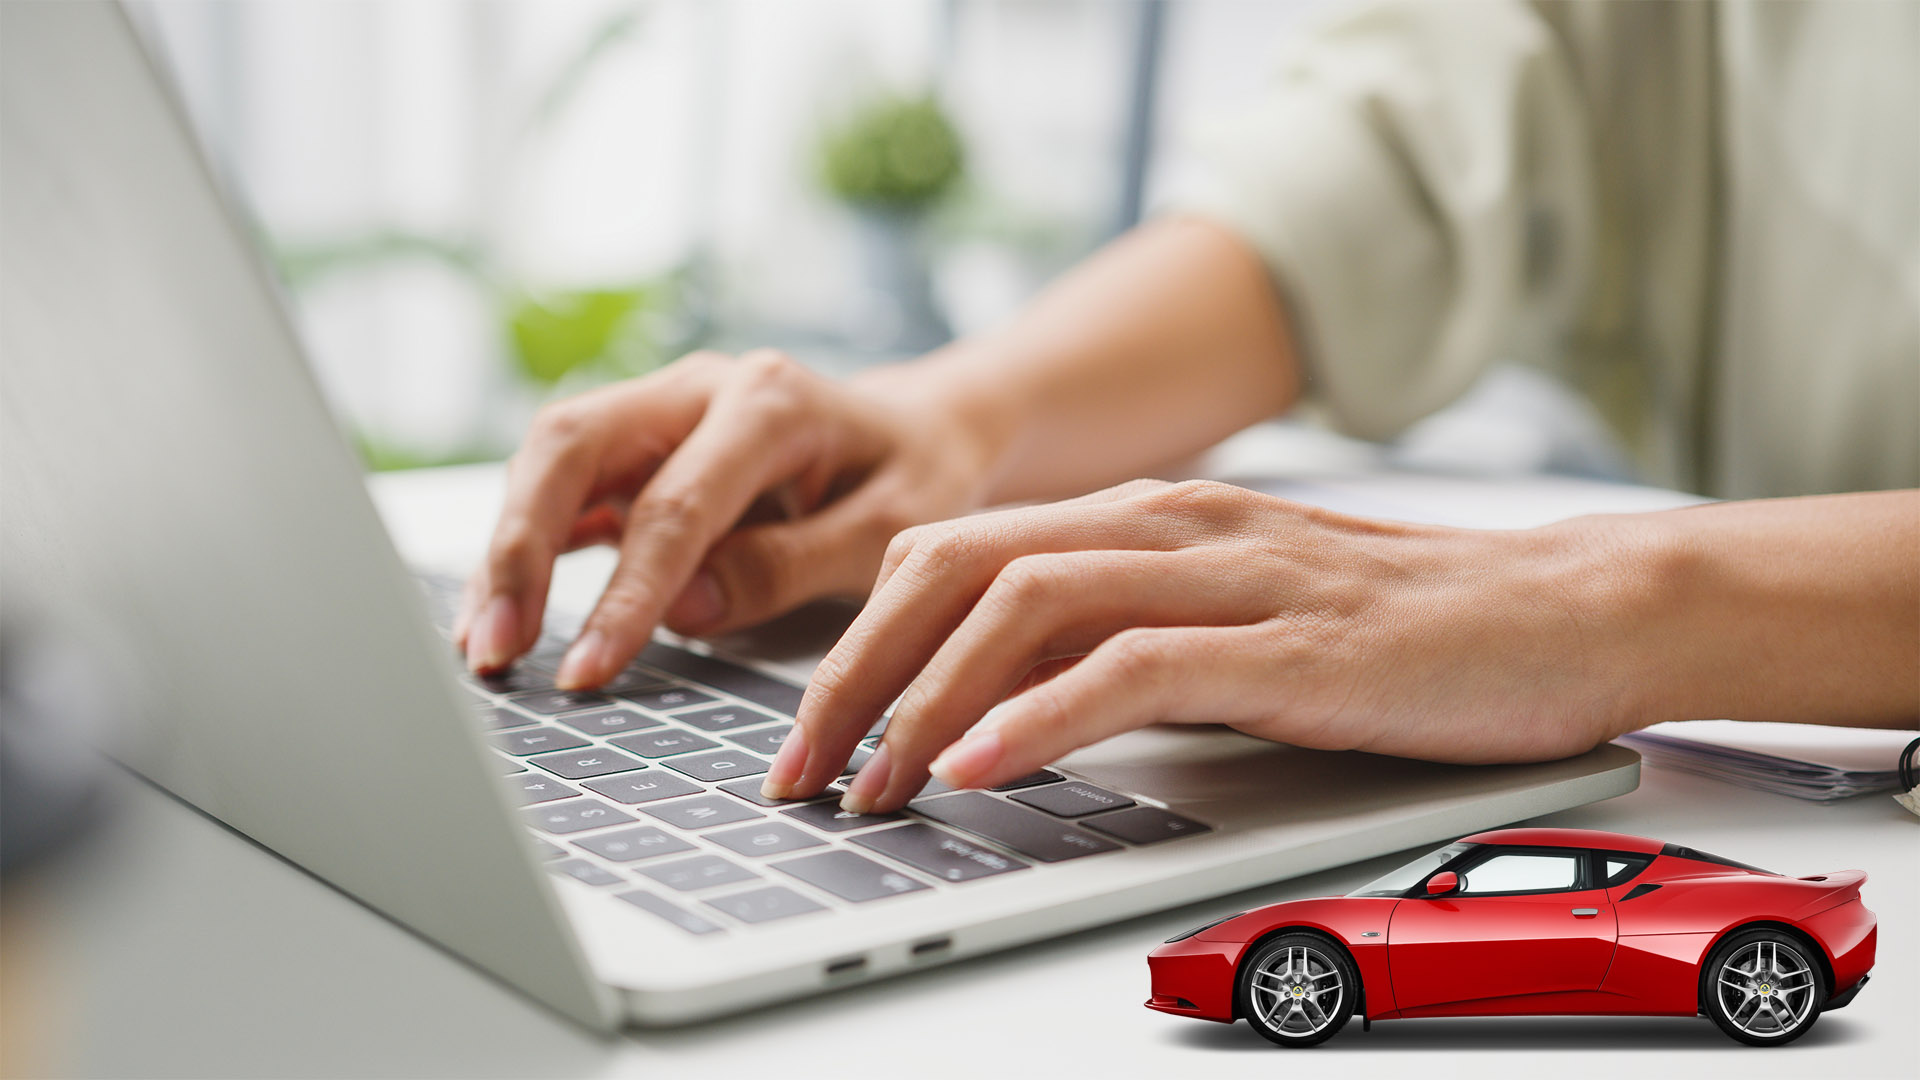 Will free classified ads help you sell your car